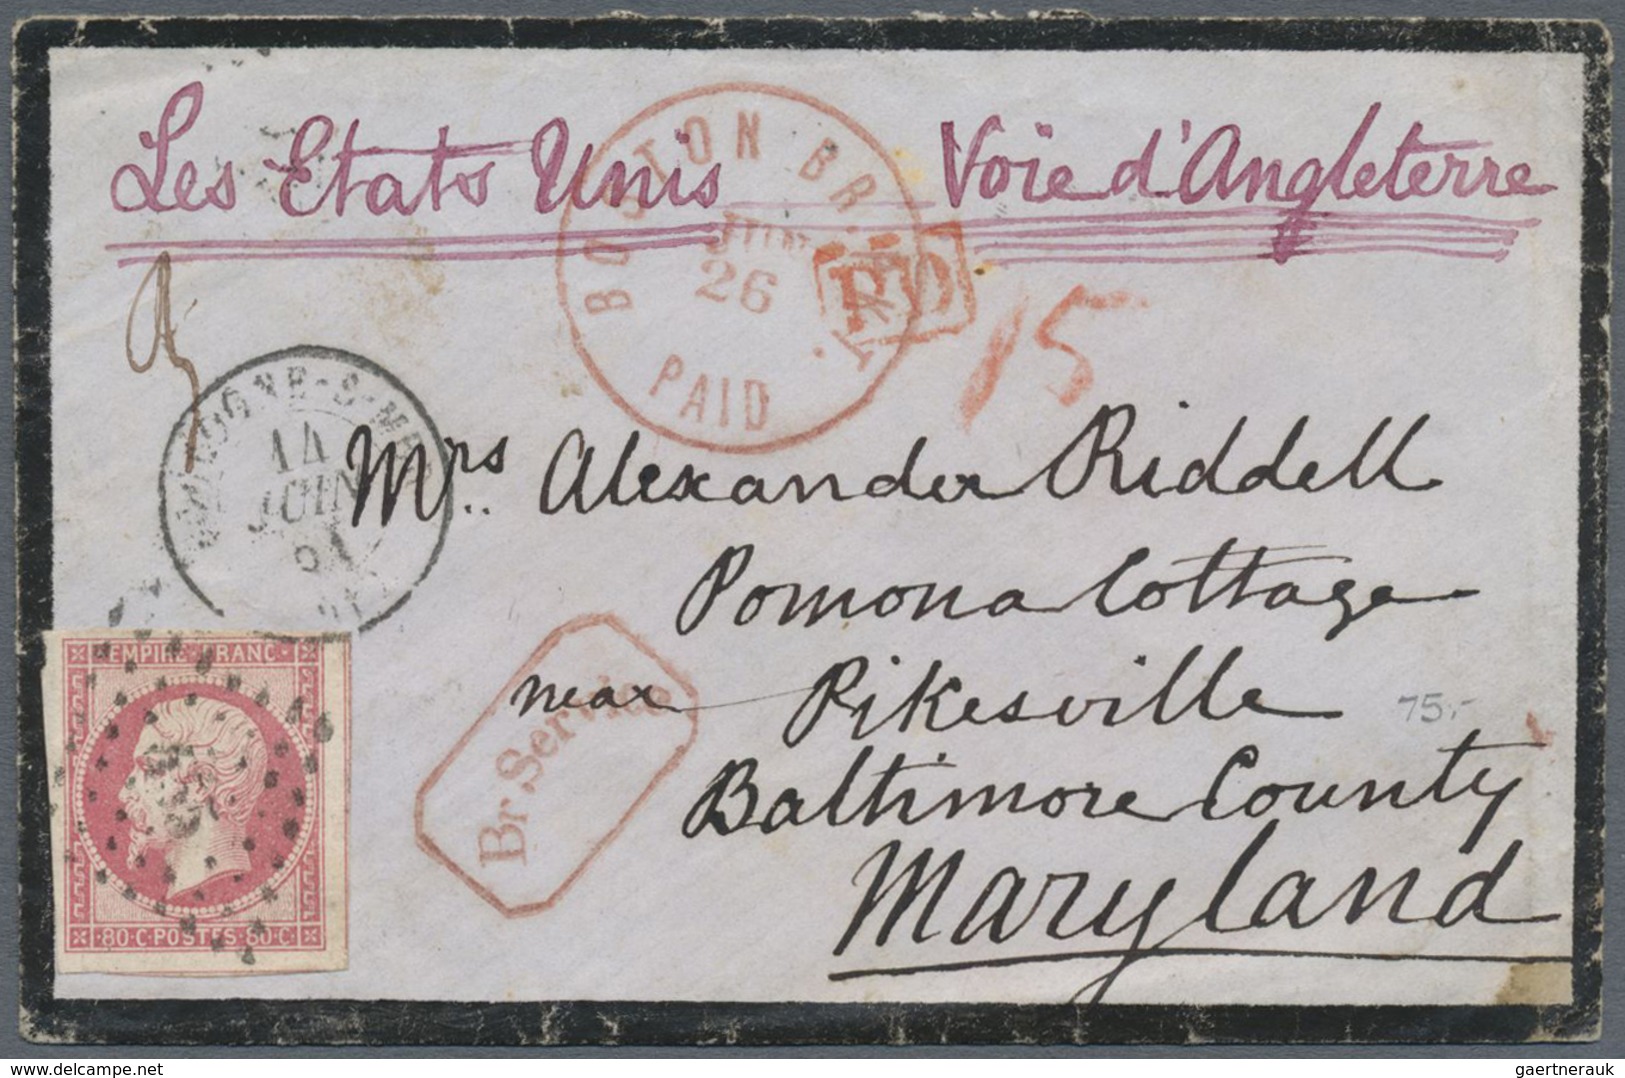 Br Frankreich: 1856/1975, Mail to USA, holding of apprx. 70 entires to USA bearing frankings Ceres and